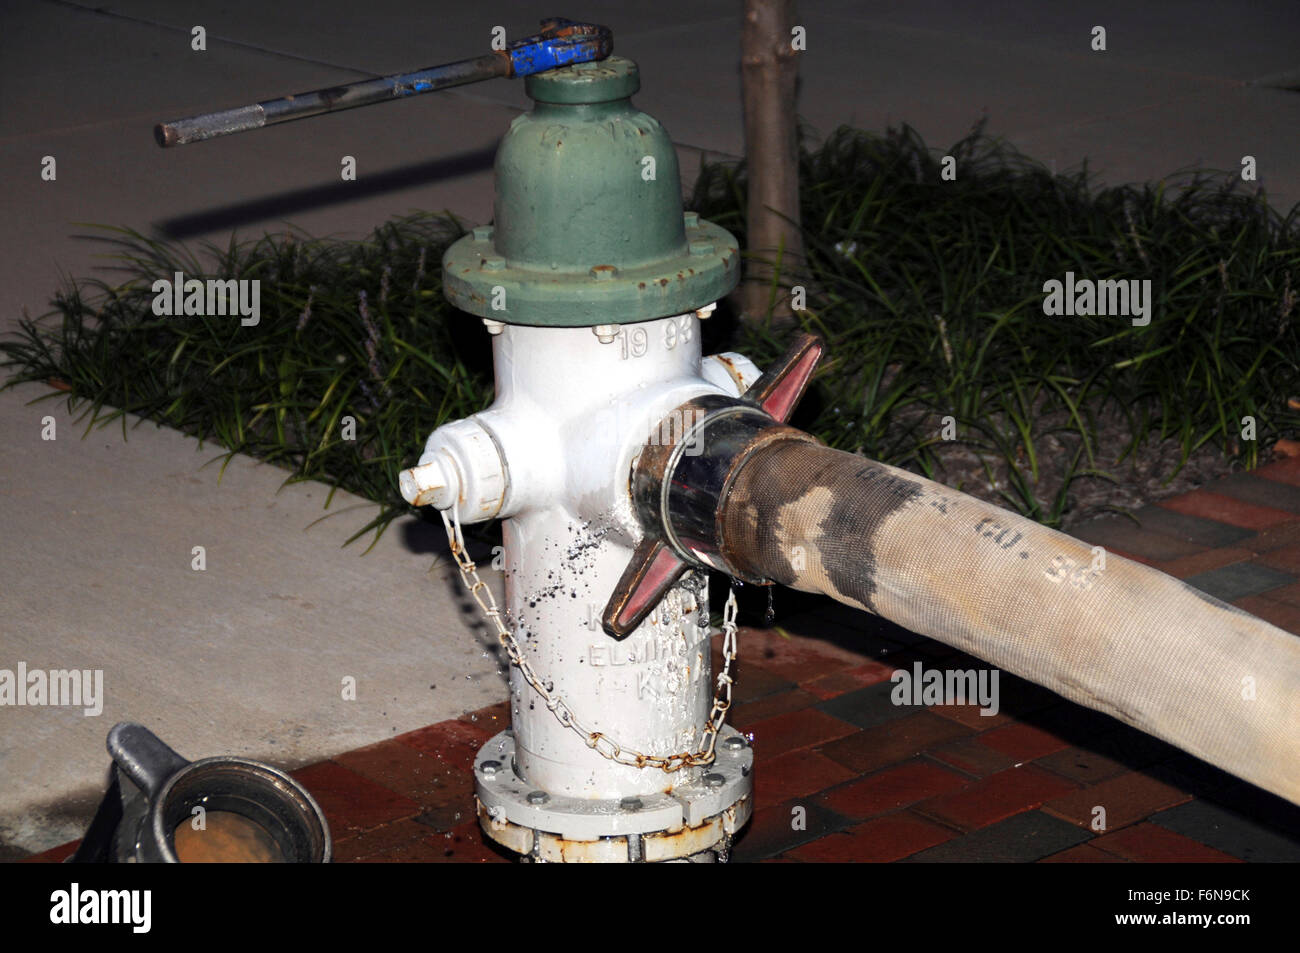 https://c8.alamy.com/comp/F6N9CK/fire-hydrant-with-fire-hose-connected-to-it-F6N9CK.jpg